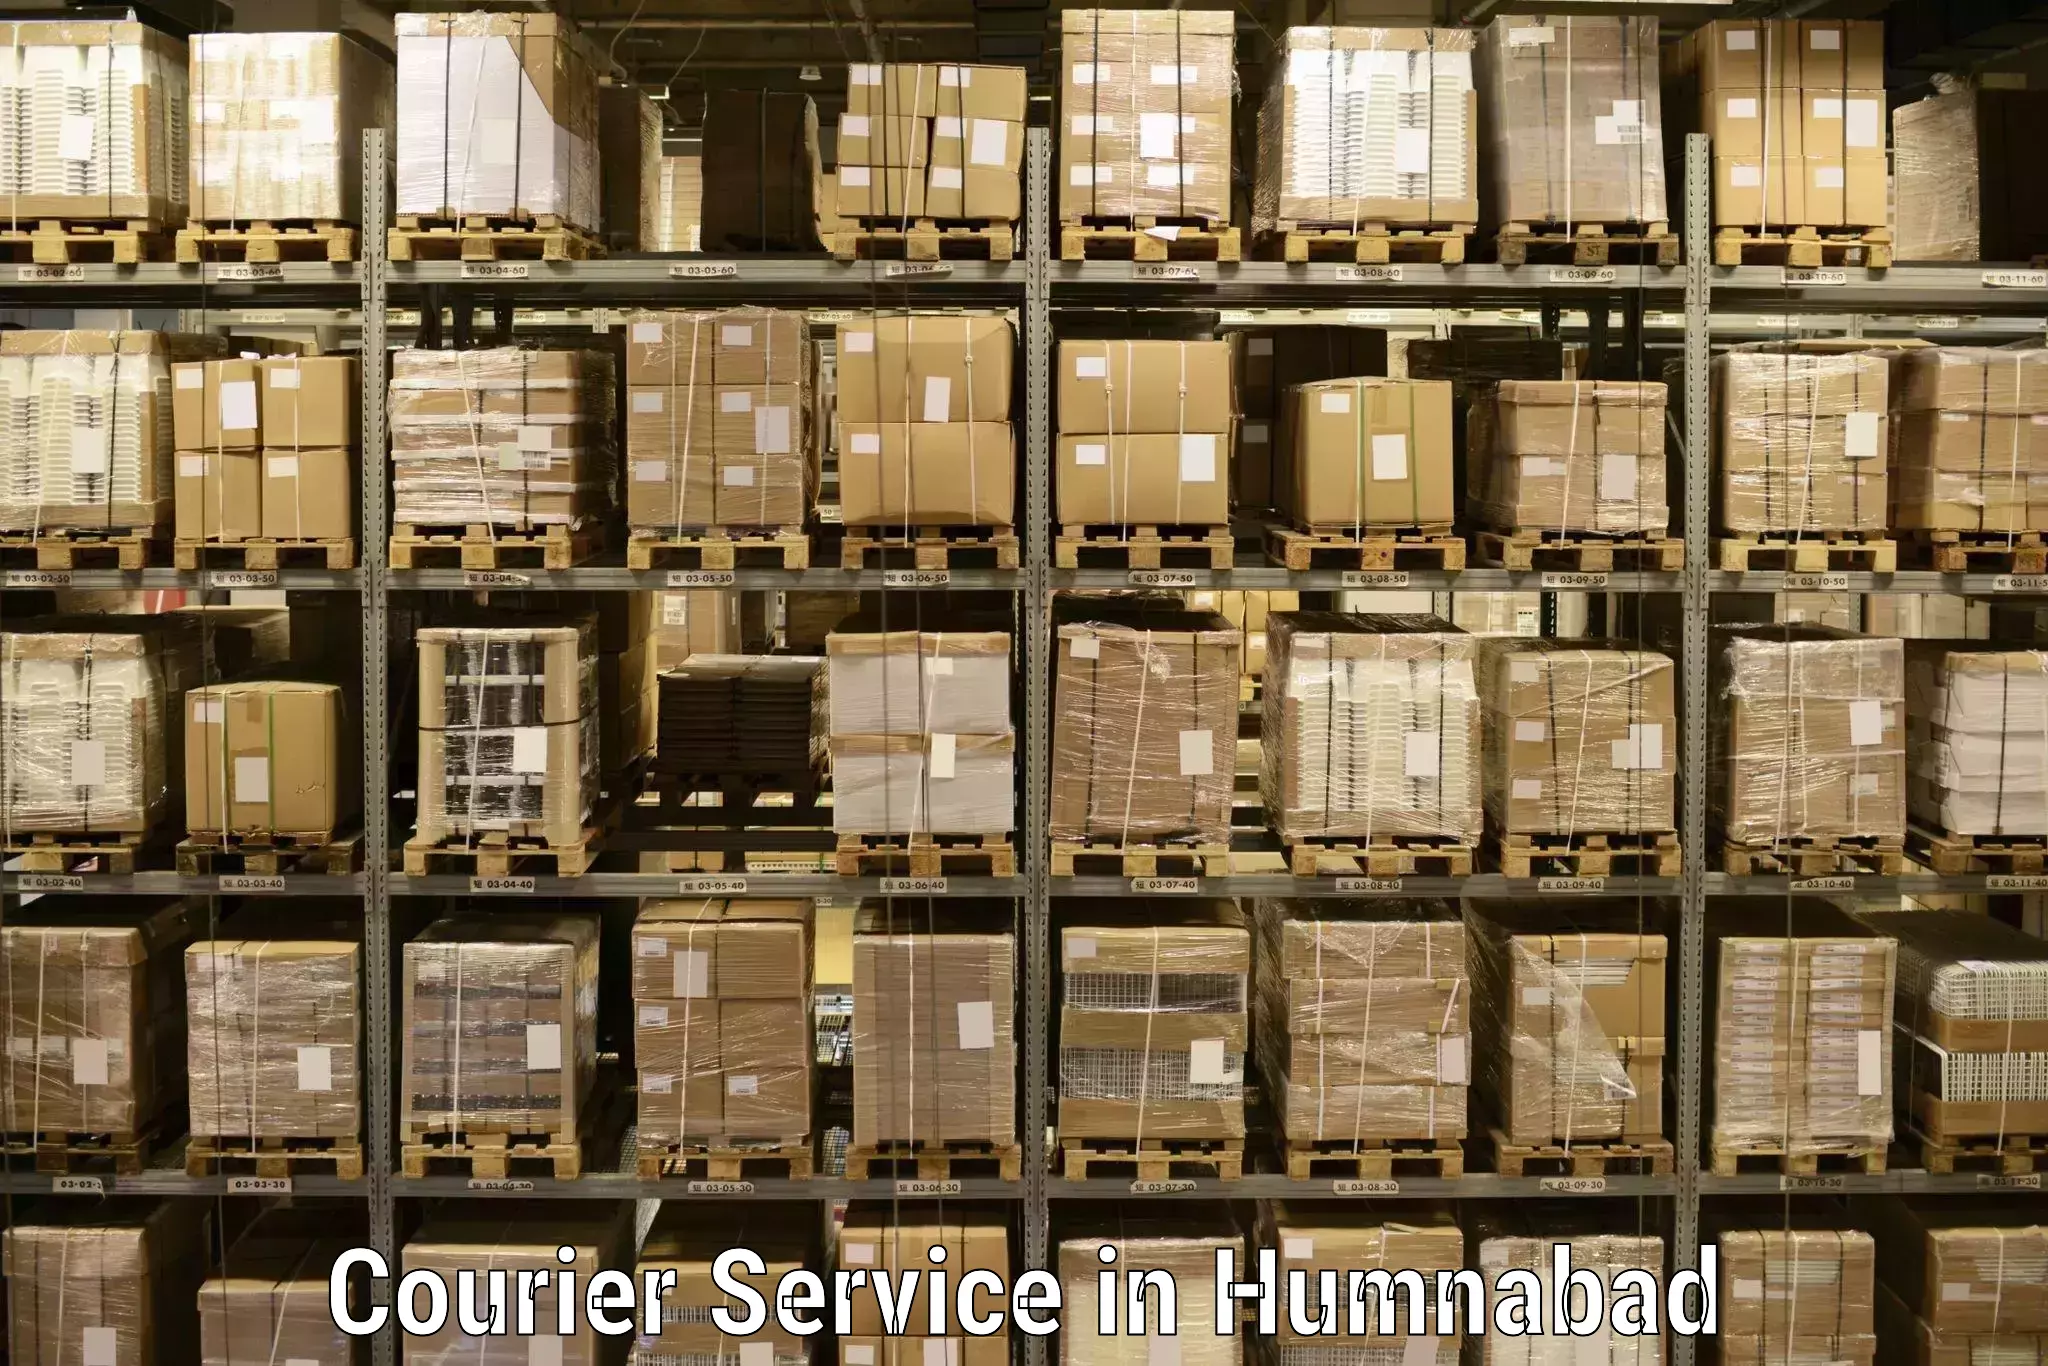 International shipping rates in Humnabad